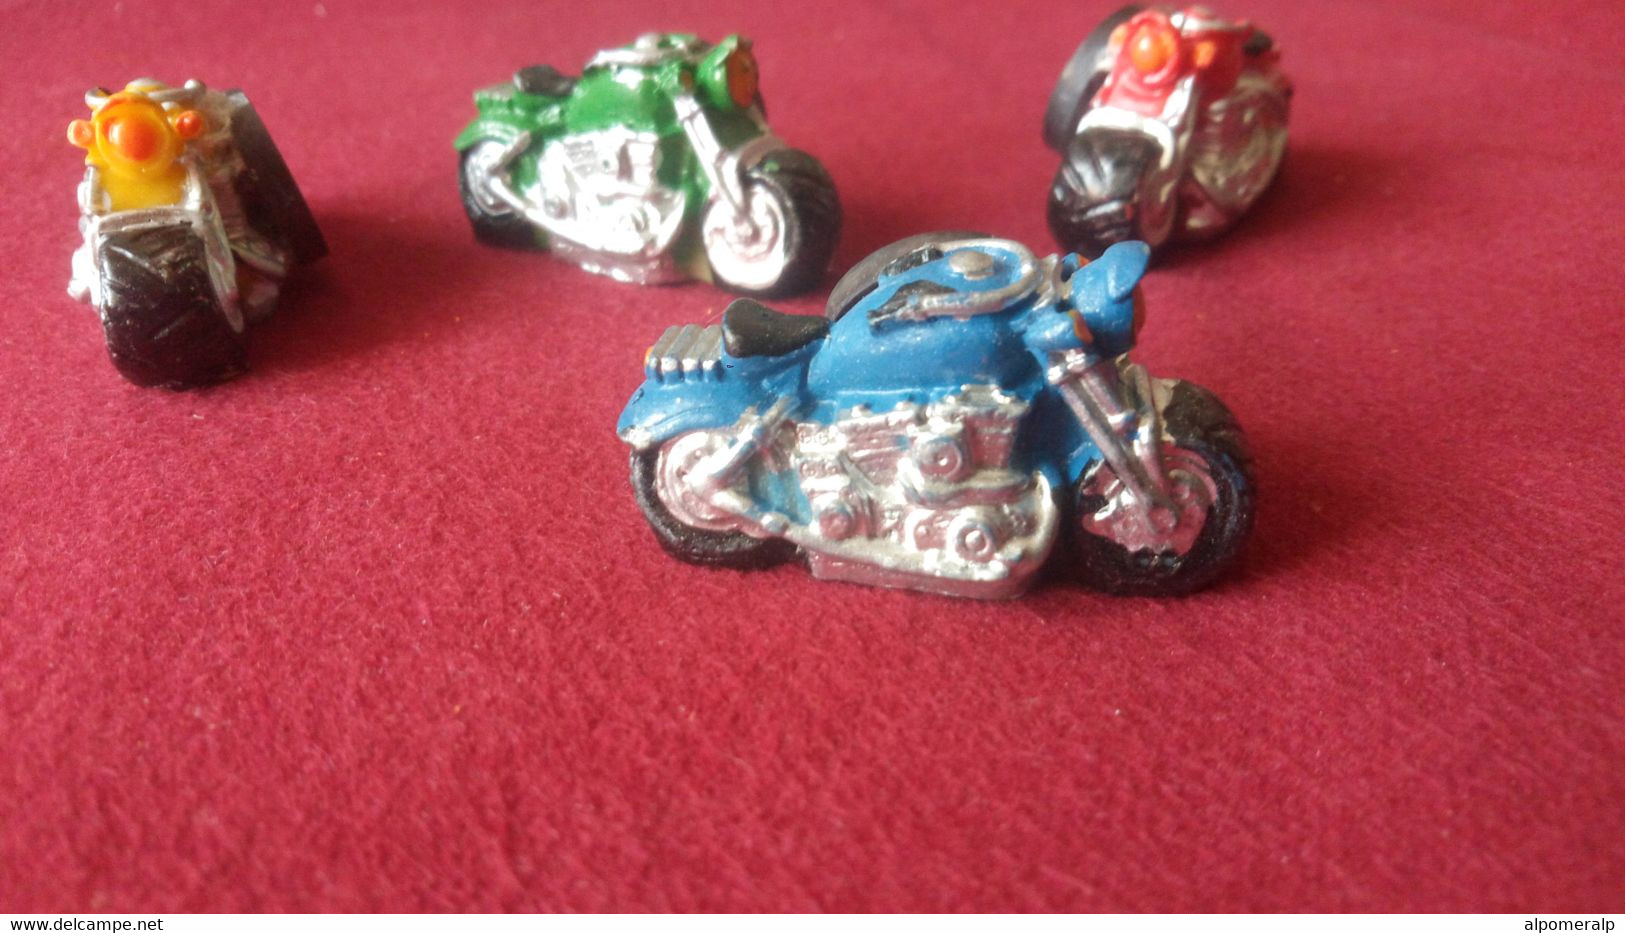 Magnet, Motorcycles, 4 pieces in 4 different colors, 4 x 2,3 cm